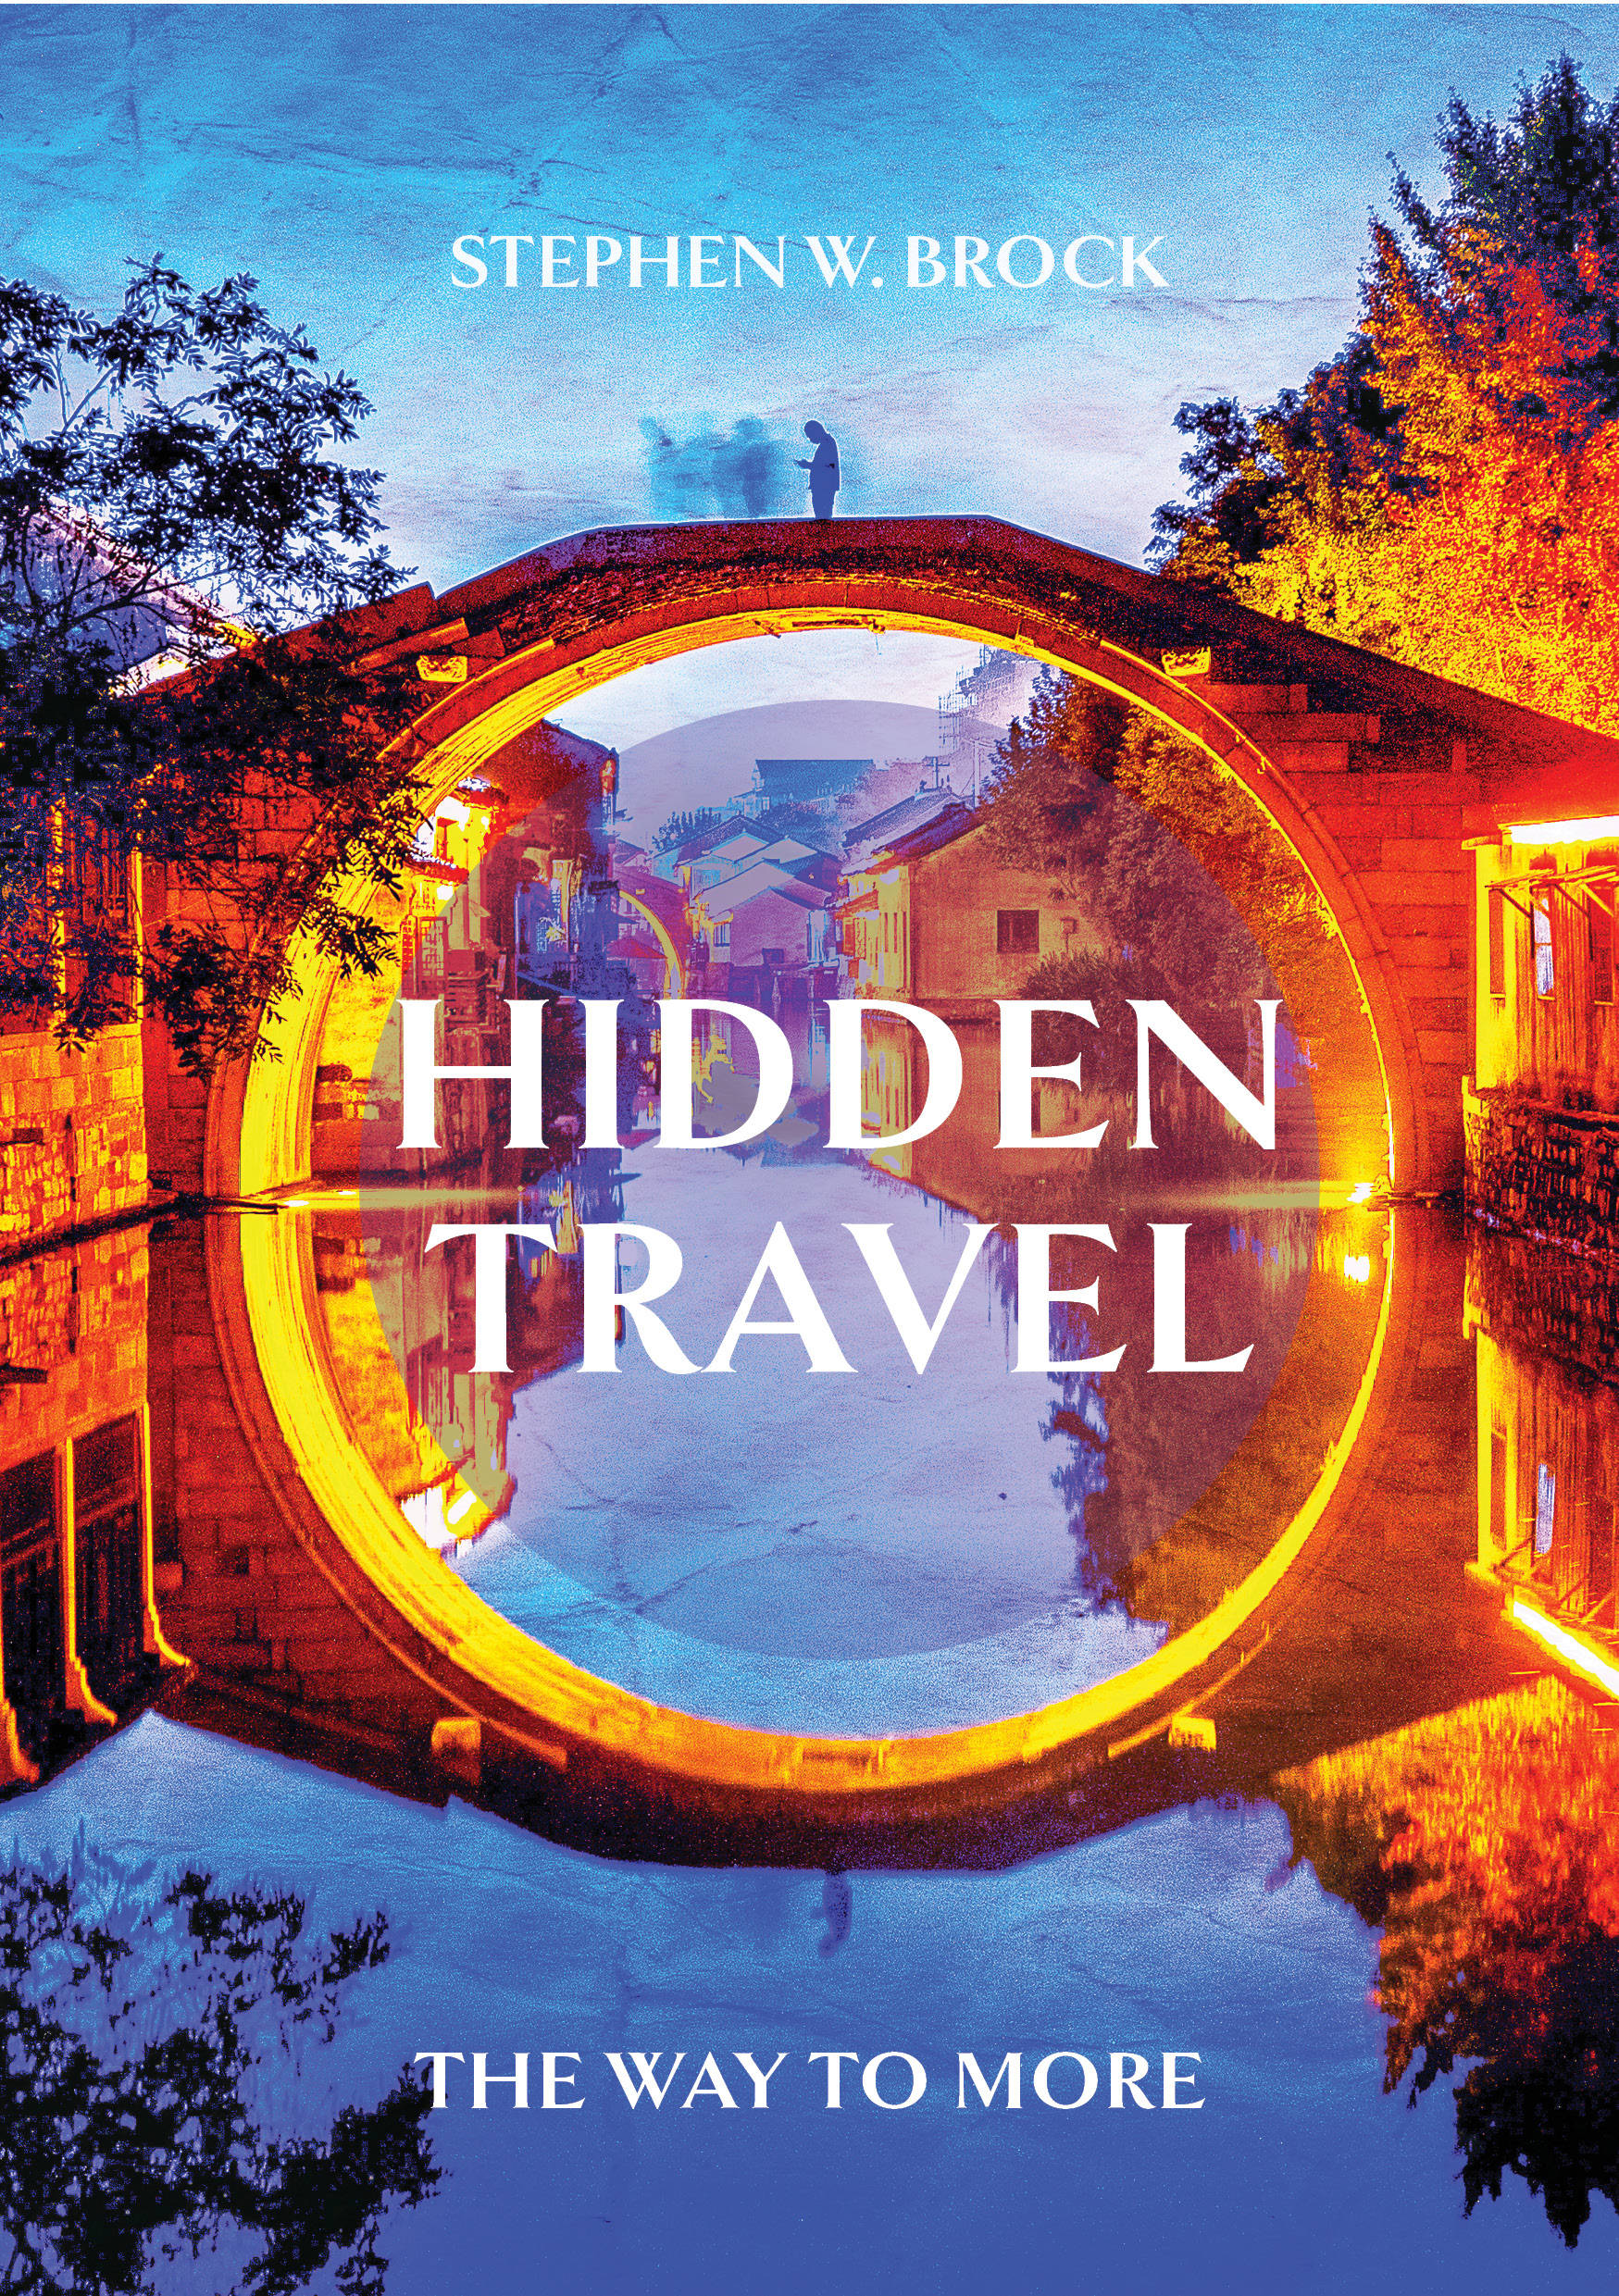 Here is the front cover Steve Brock’s new book, Hidden Travel: The Way to More. Courtesy image, Steve Brock.